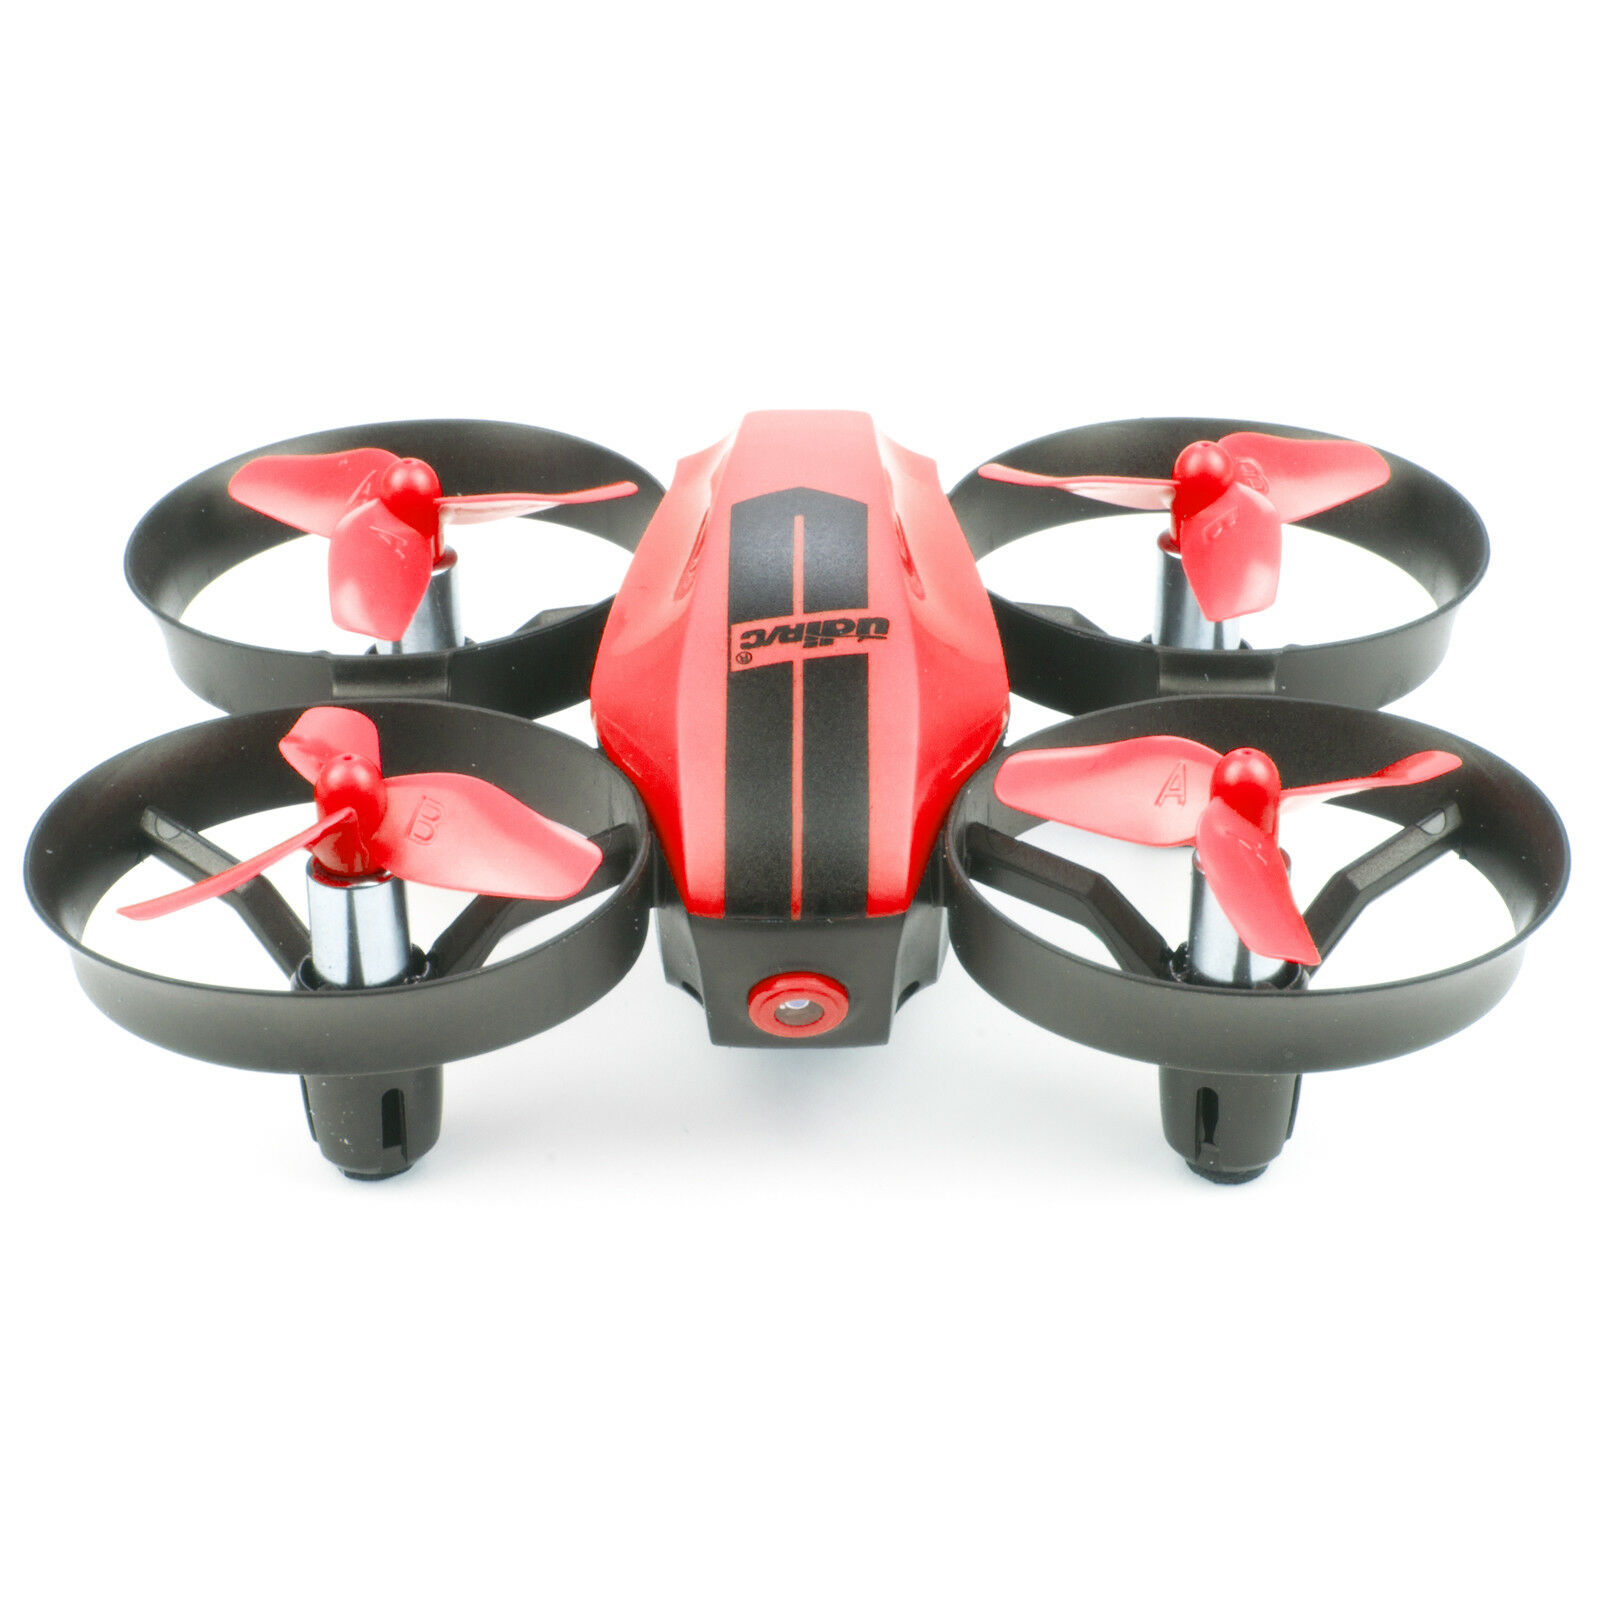 Udi U46 Rc Drone Mini Small Light Altitude Hold 2.4ghz Quadcopter For Kids Red